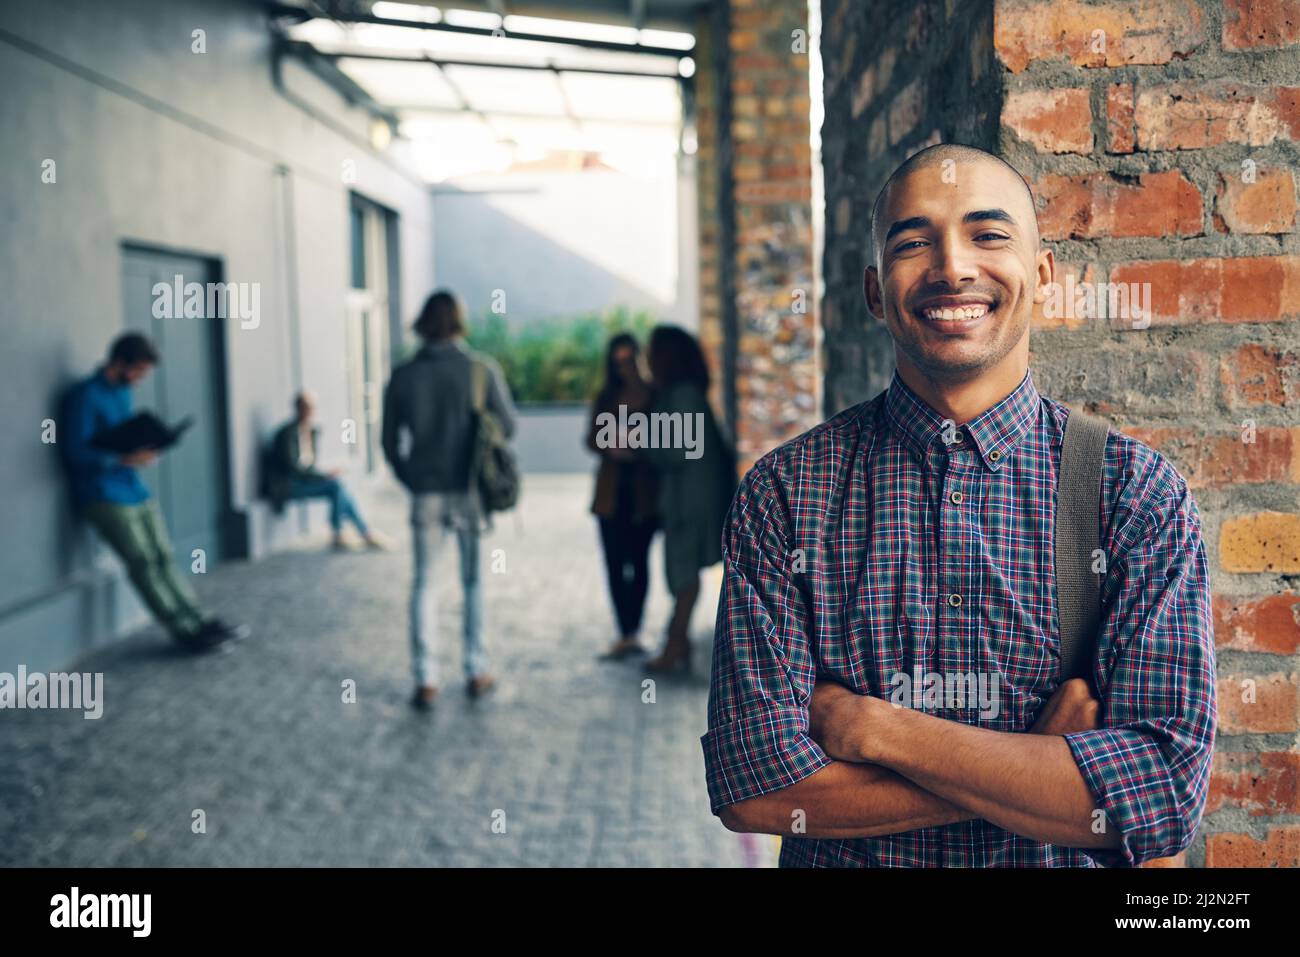 Confident about the college experience. Portrait of a happy young man standing outdoors on campus. Stock Photo